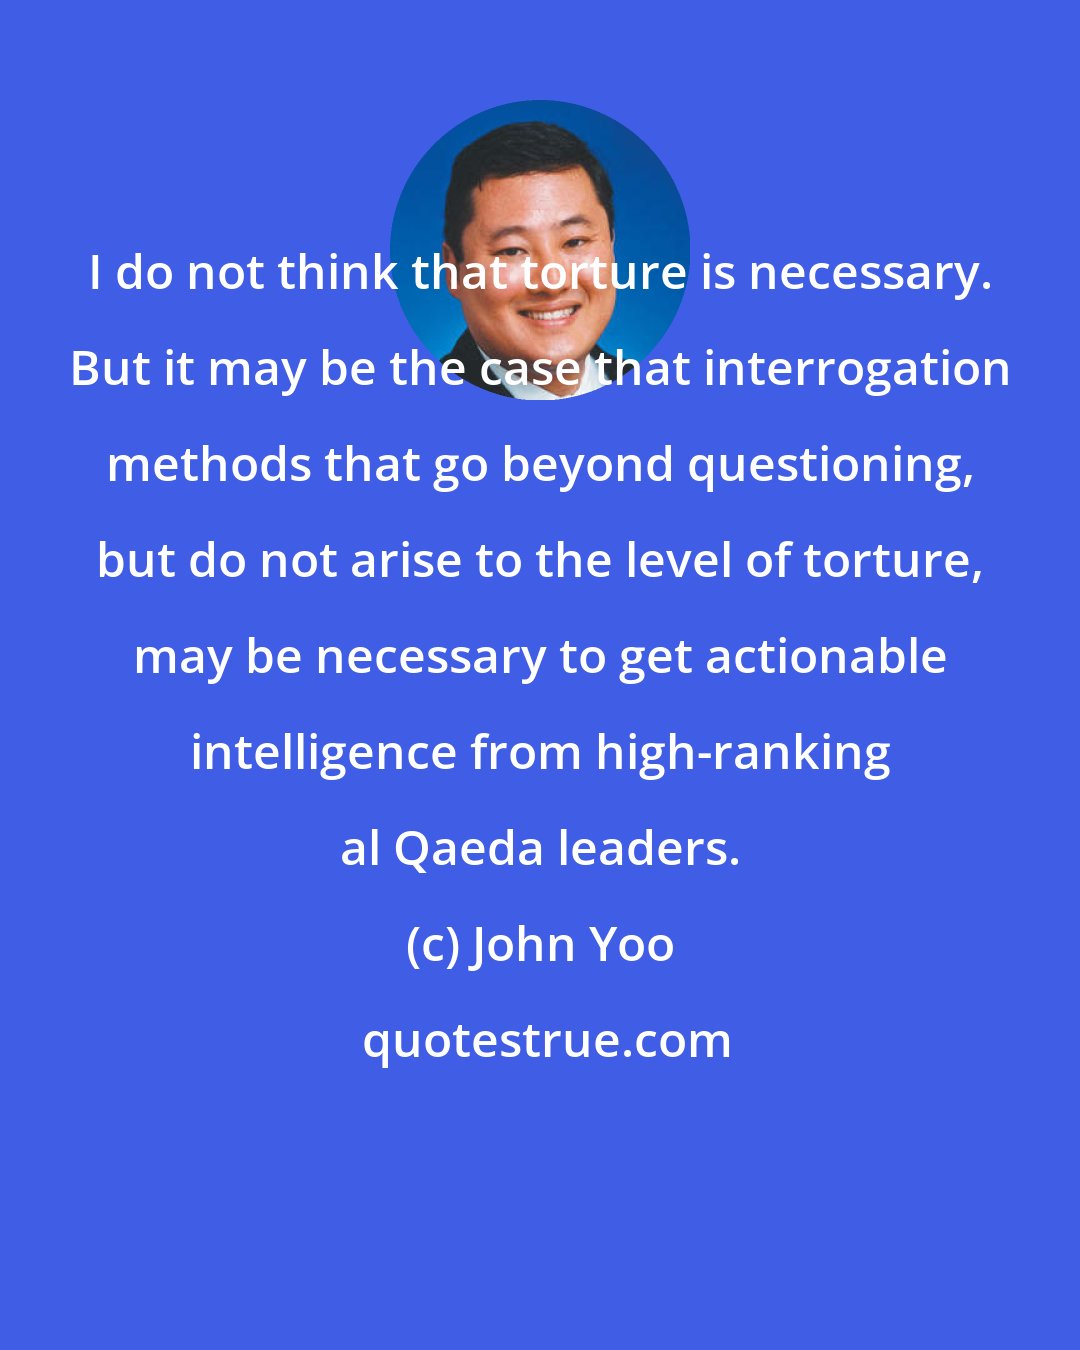 John Yoo: I do not think that torture is necessary. But it may be the case that interrogation methods that go beyond questioning, but do not arise to the level of torture, may be necessary to get actionable intelligence from high-ranking al Qaeda leaders.